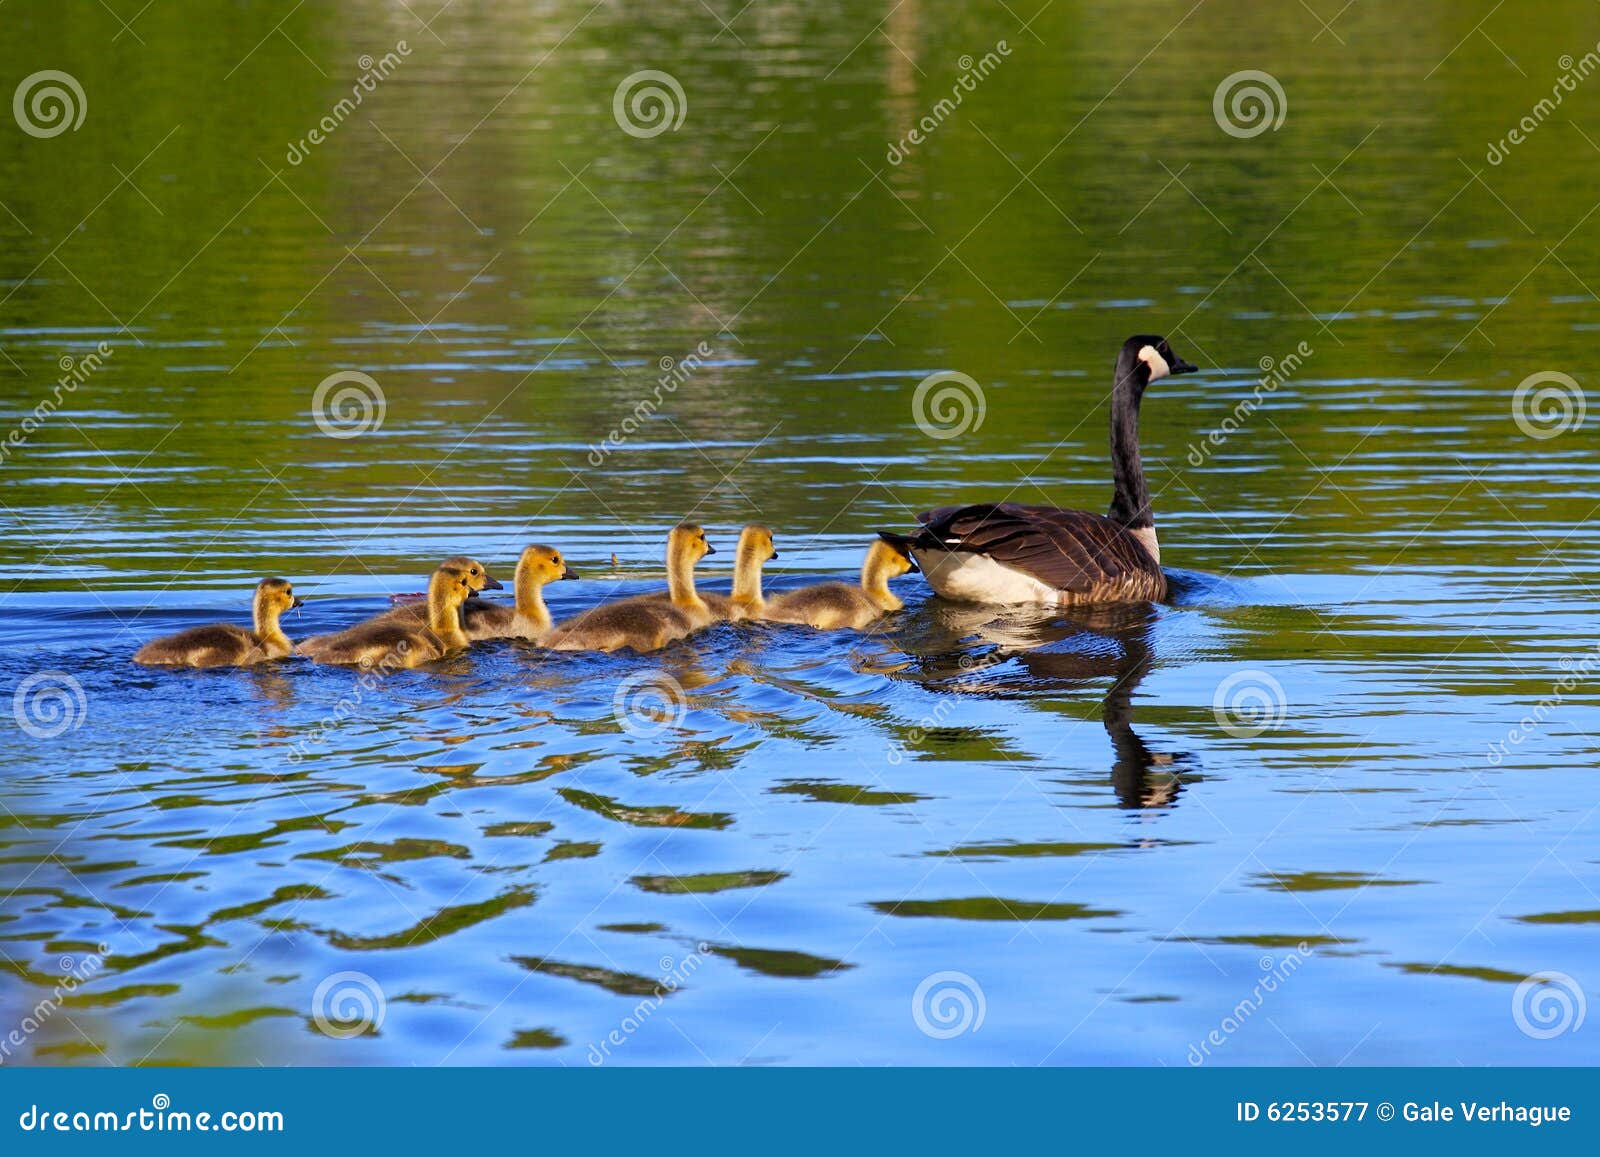 canada geese in spring